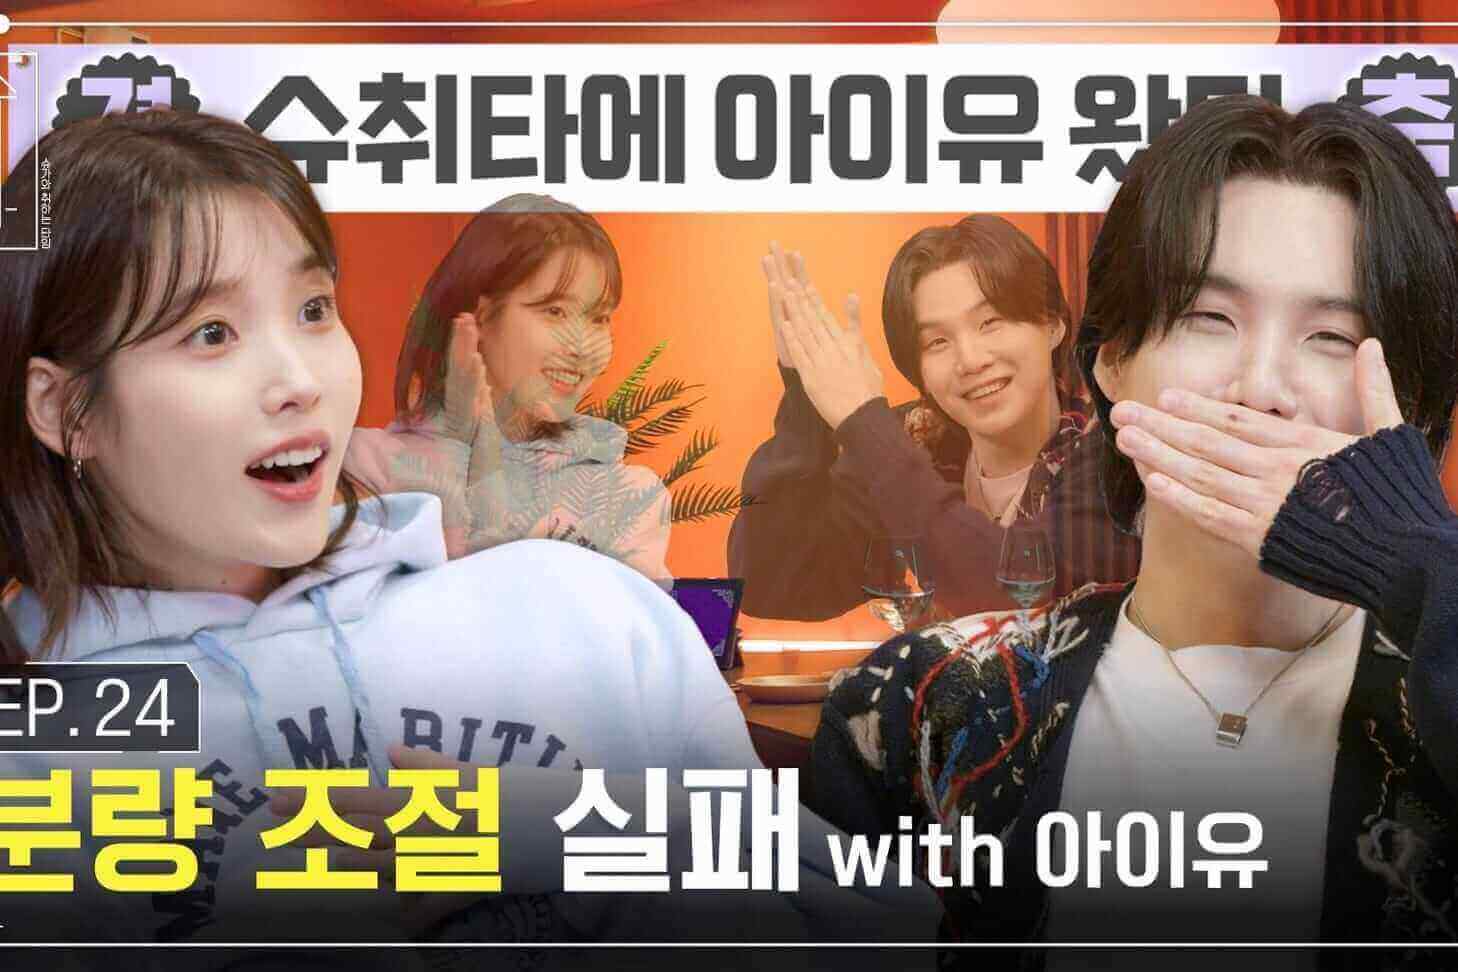 IU Opens Up About Feeling Anxious at BTS' Label - Here's Why